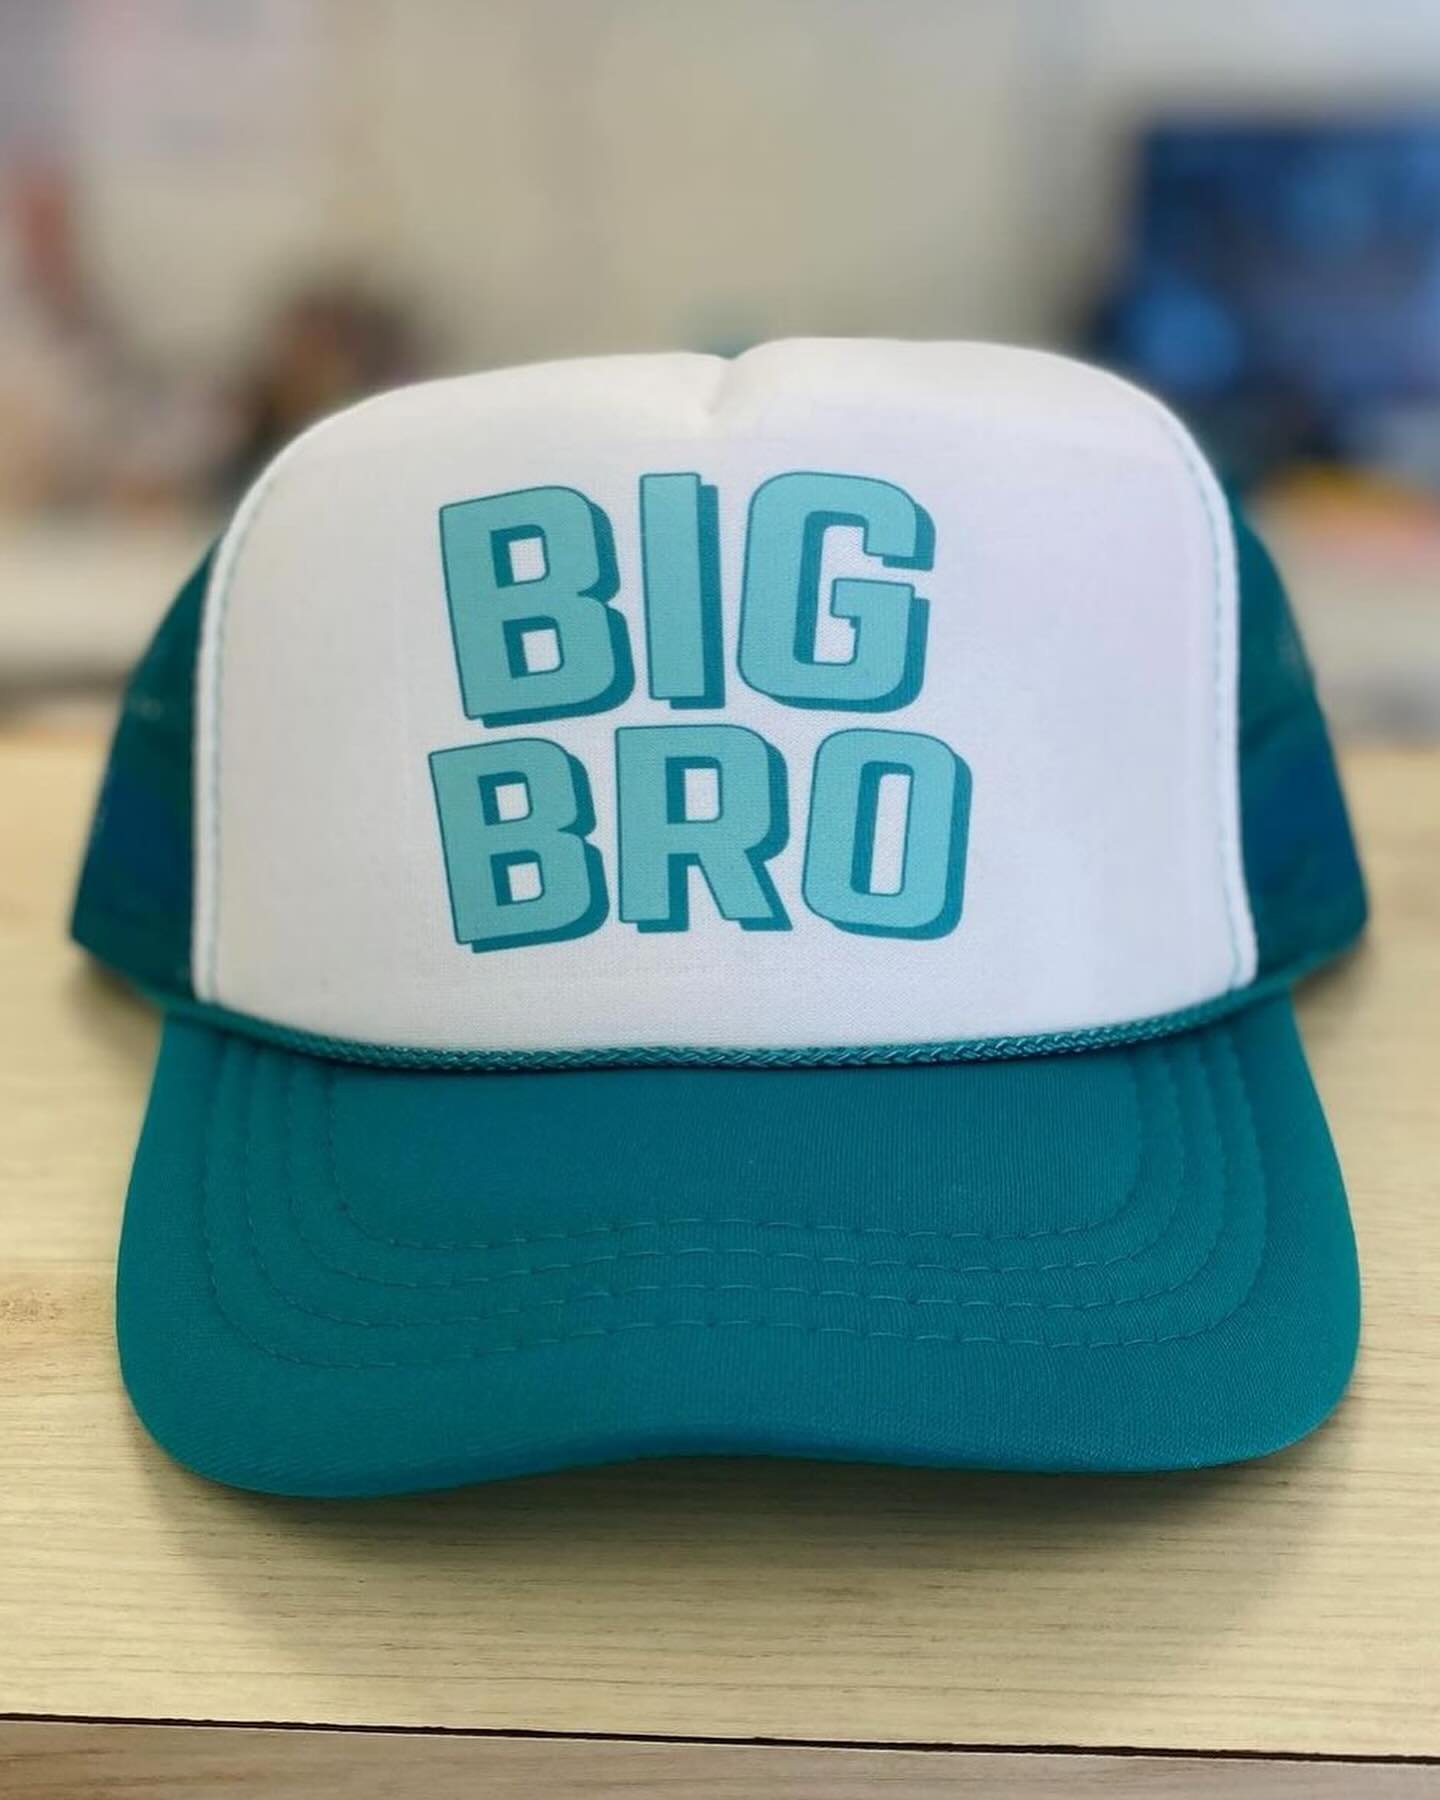 Shop all things siblings! Big brother and sister hats, capes, books, bracelets, and more in store now! 👦👧
&bull;
&bull;
&bull;
&bull;
&bull;
#bigbrother #littlebrother #bigsister #bigsis #littlesister #sister #sisters #brothers #brother #brotherand